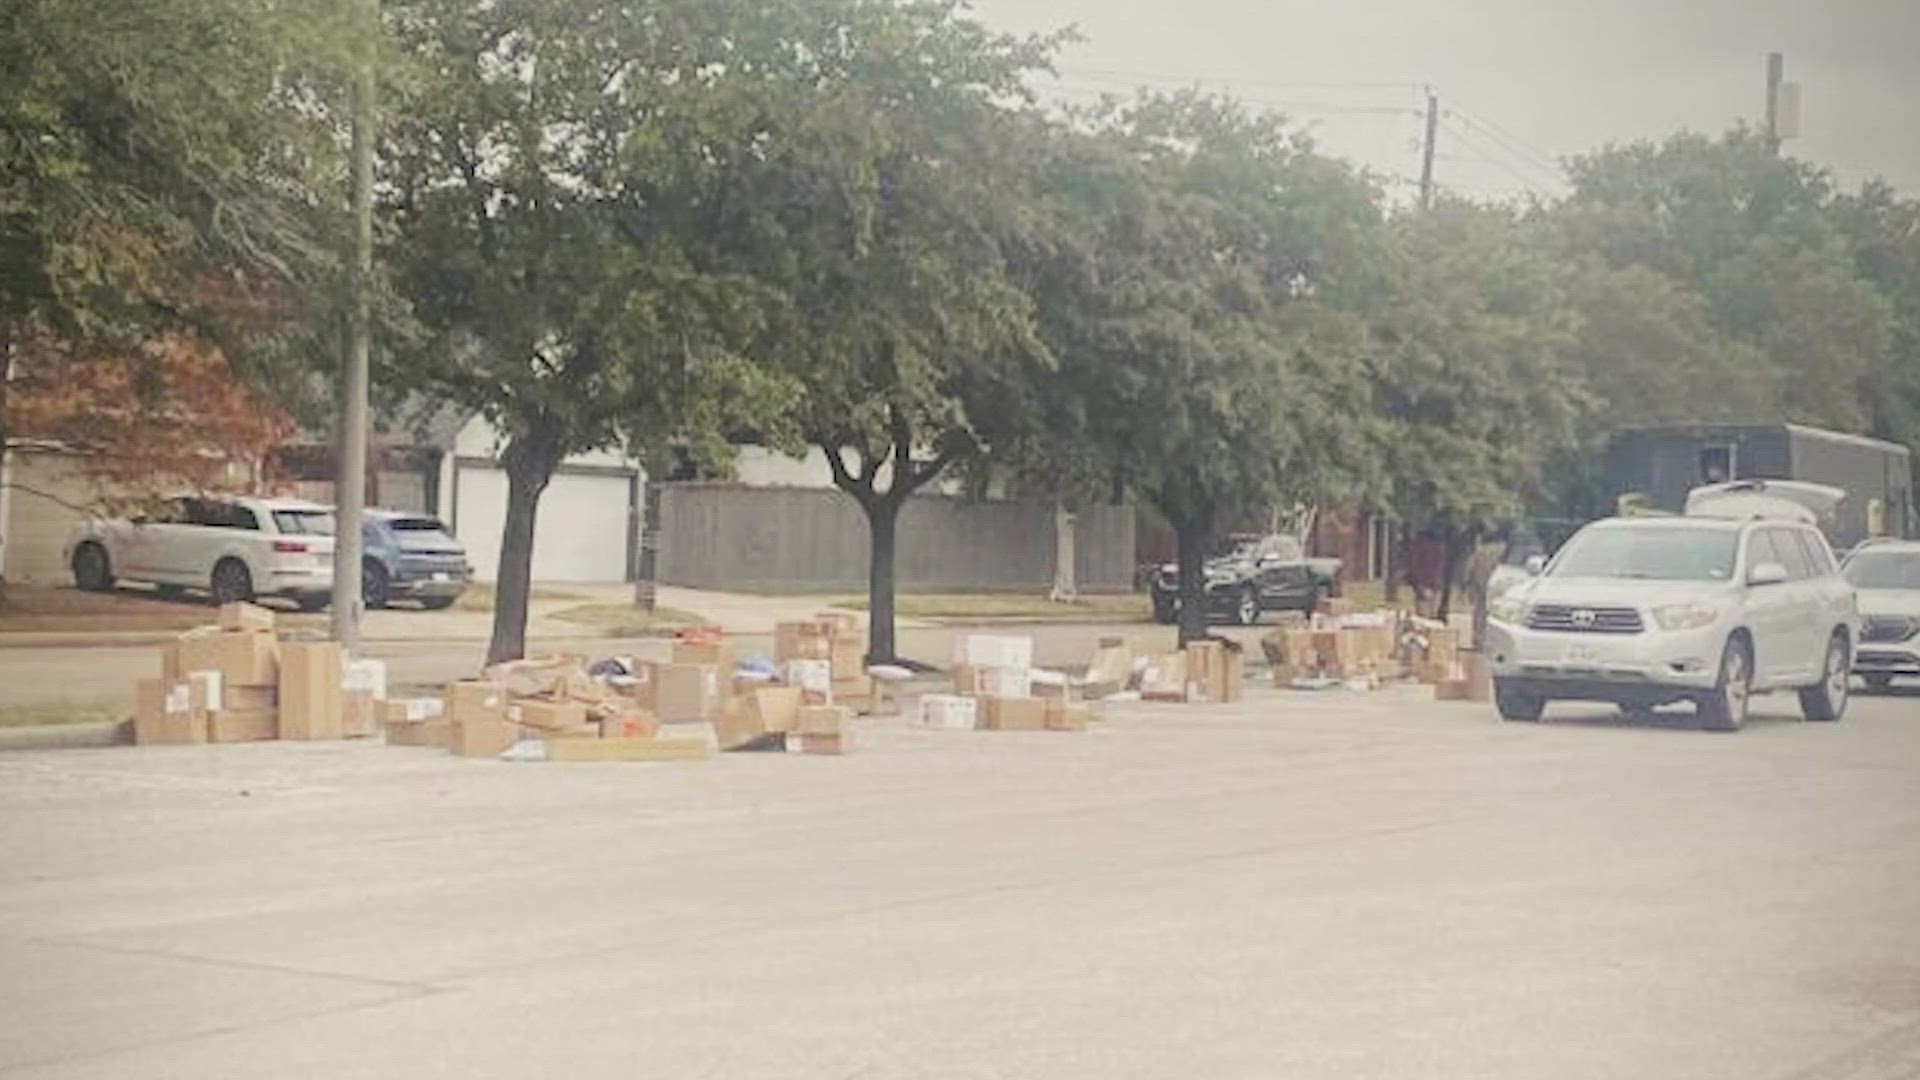 When Nancy Gilbertson saw a bunch of packages laid out in a West U parking lot, she reached out to KHOU 11 News for answers.